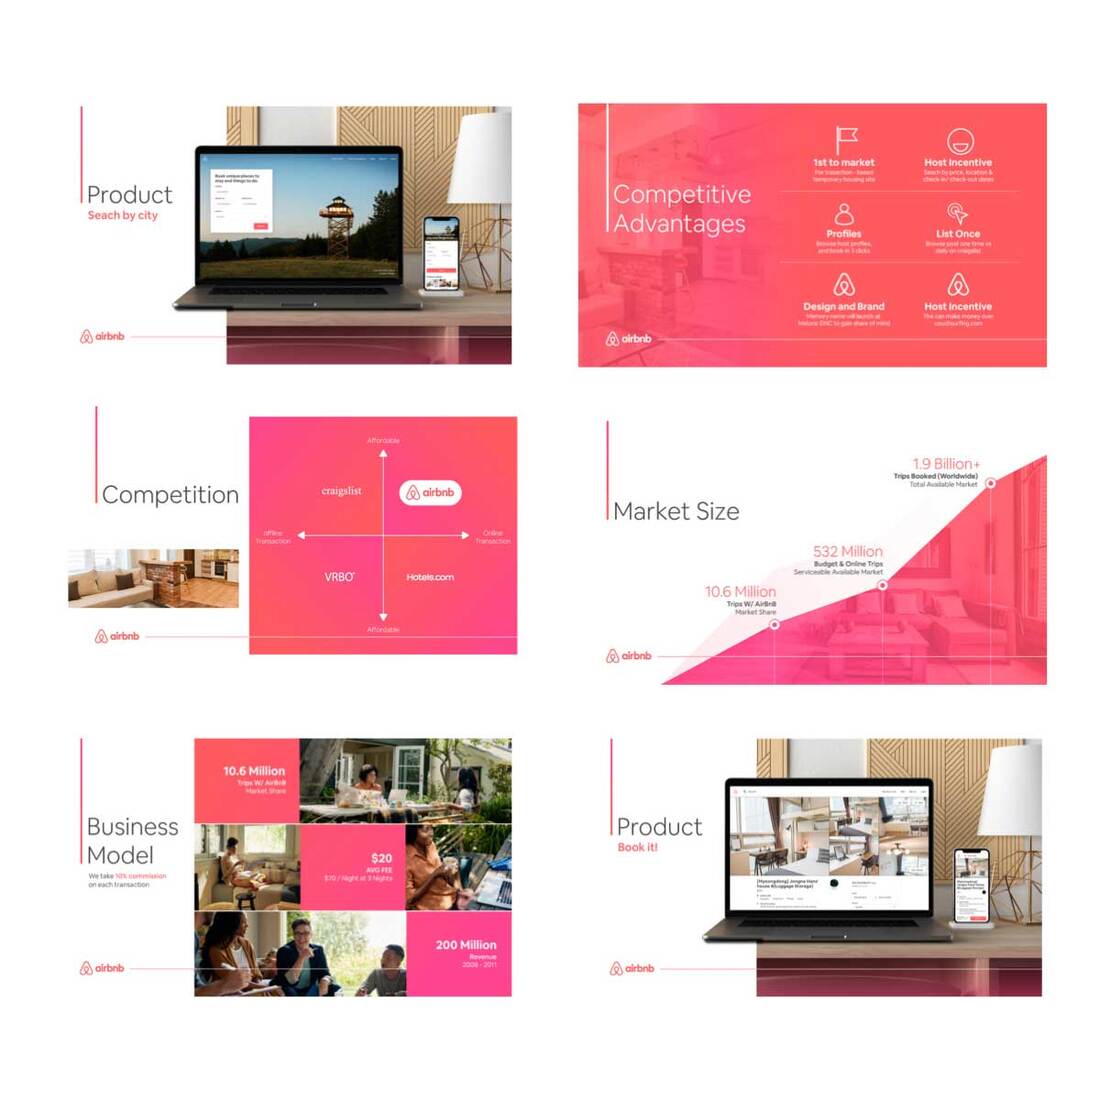 Image contains airbnb pitch deck